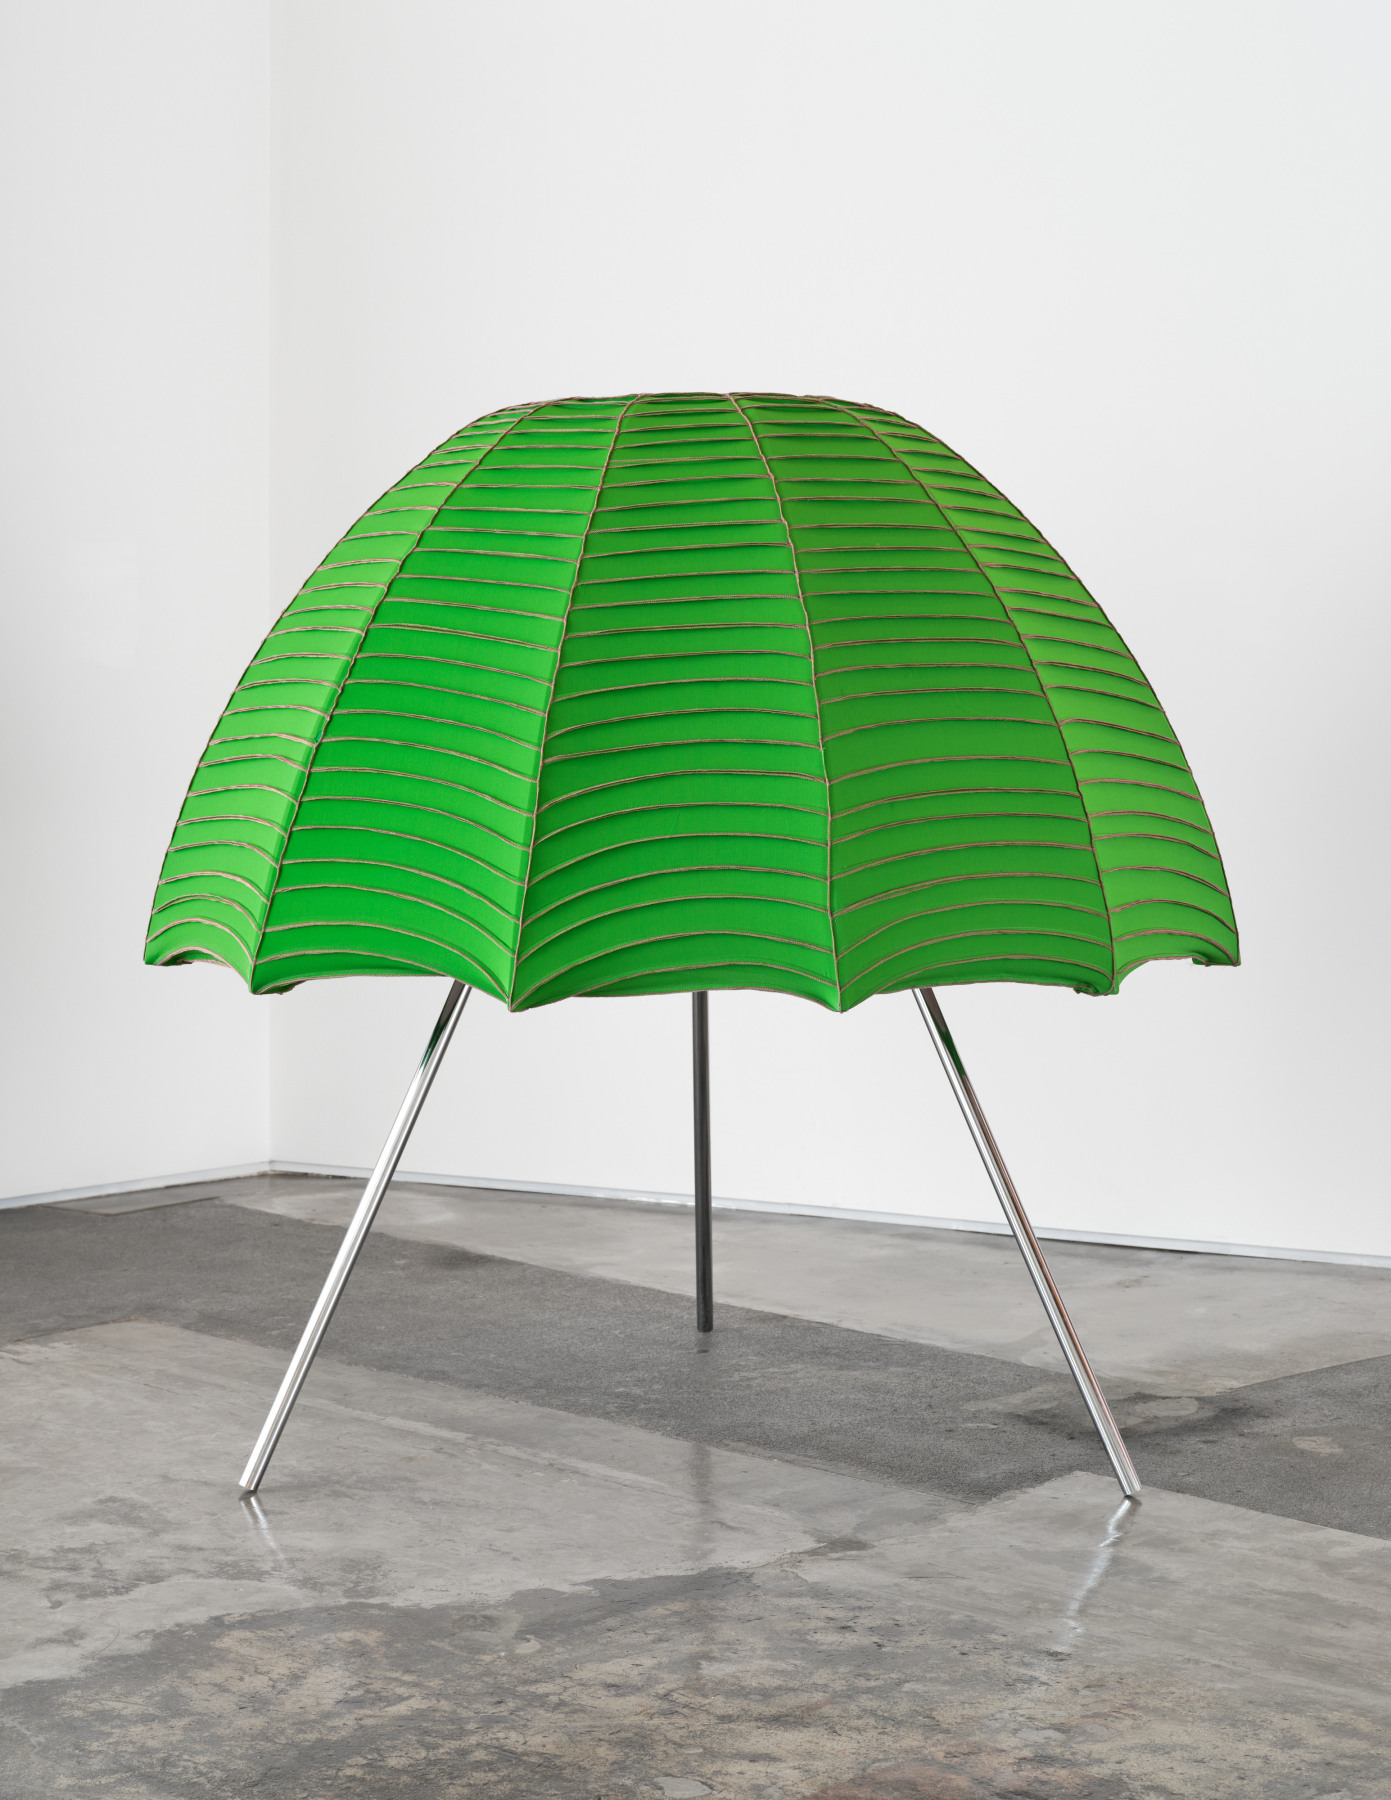 Anthony Olubunmi Akinbola artwork titled "Spinin". Green durags with red seams sewn together and stretched over a dome shape with three aluminum legs. 68 1/2 x 71 x 71 in (174 x 180.3 x 180.3 cm), durags on aluminum, 2023.